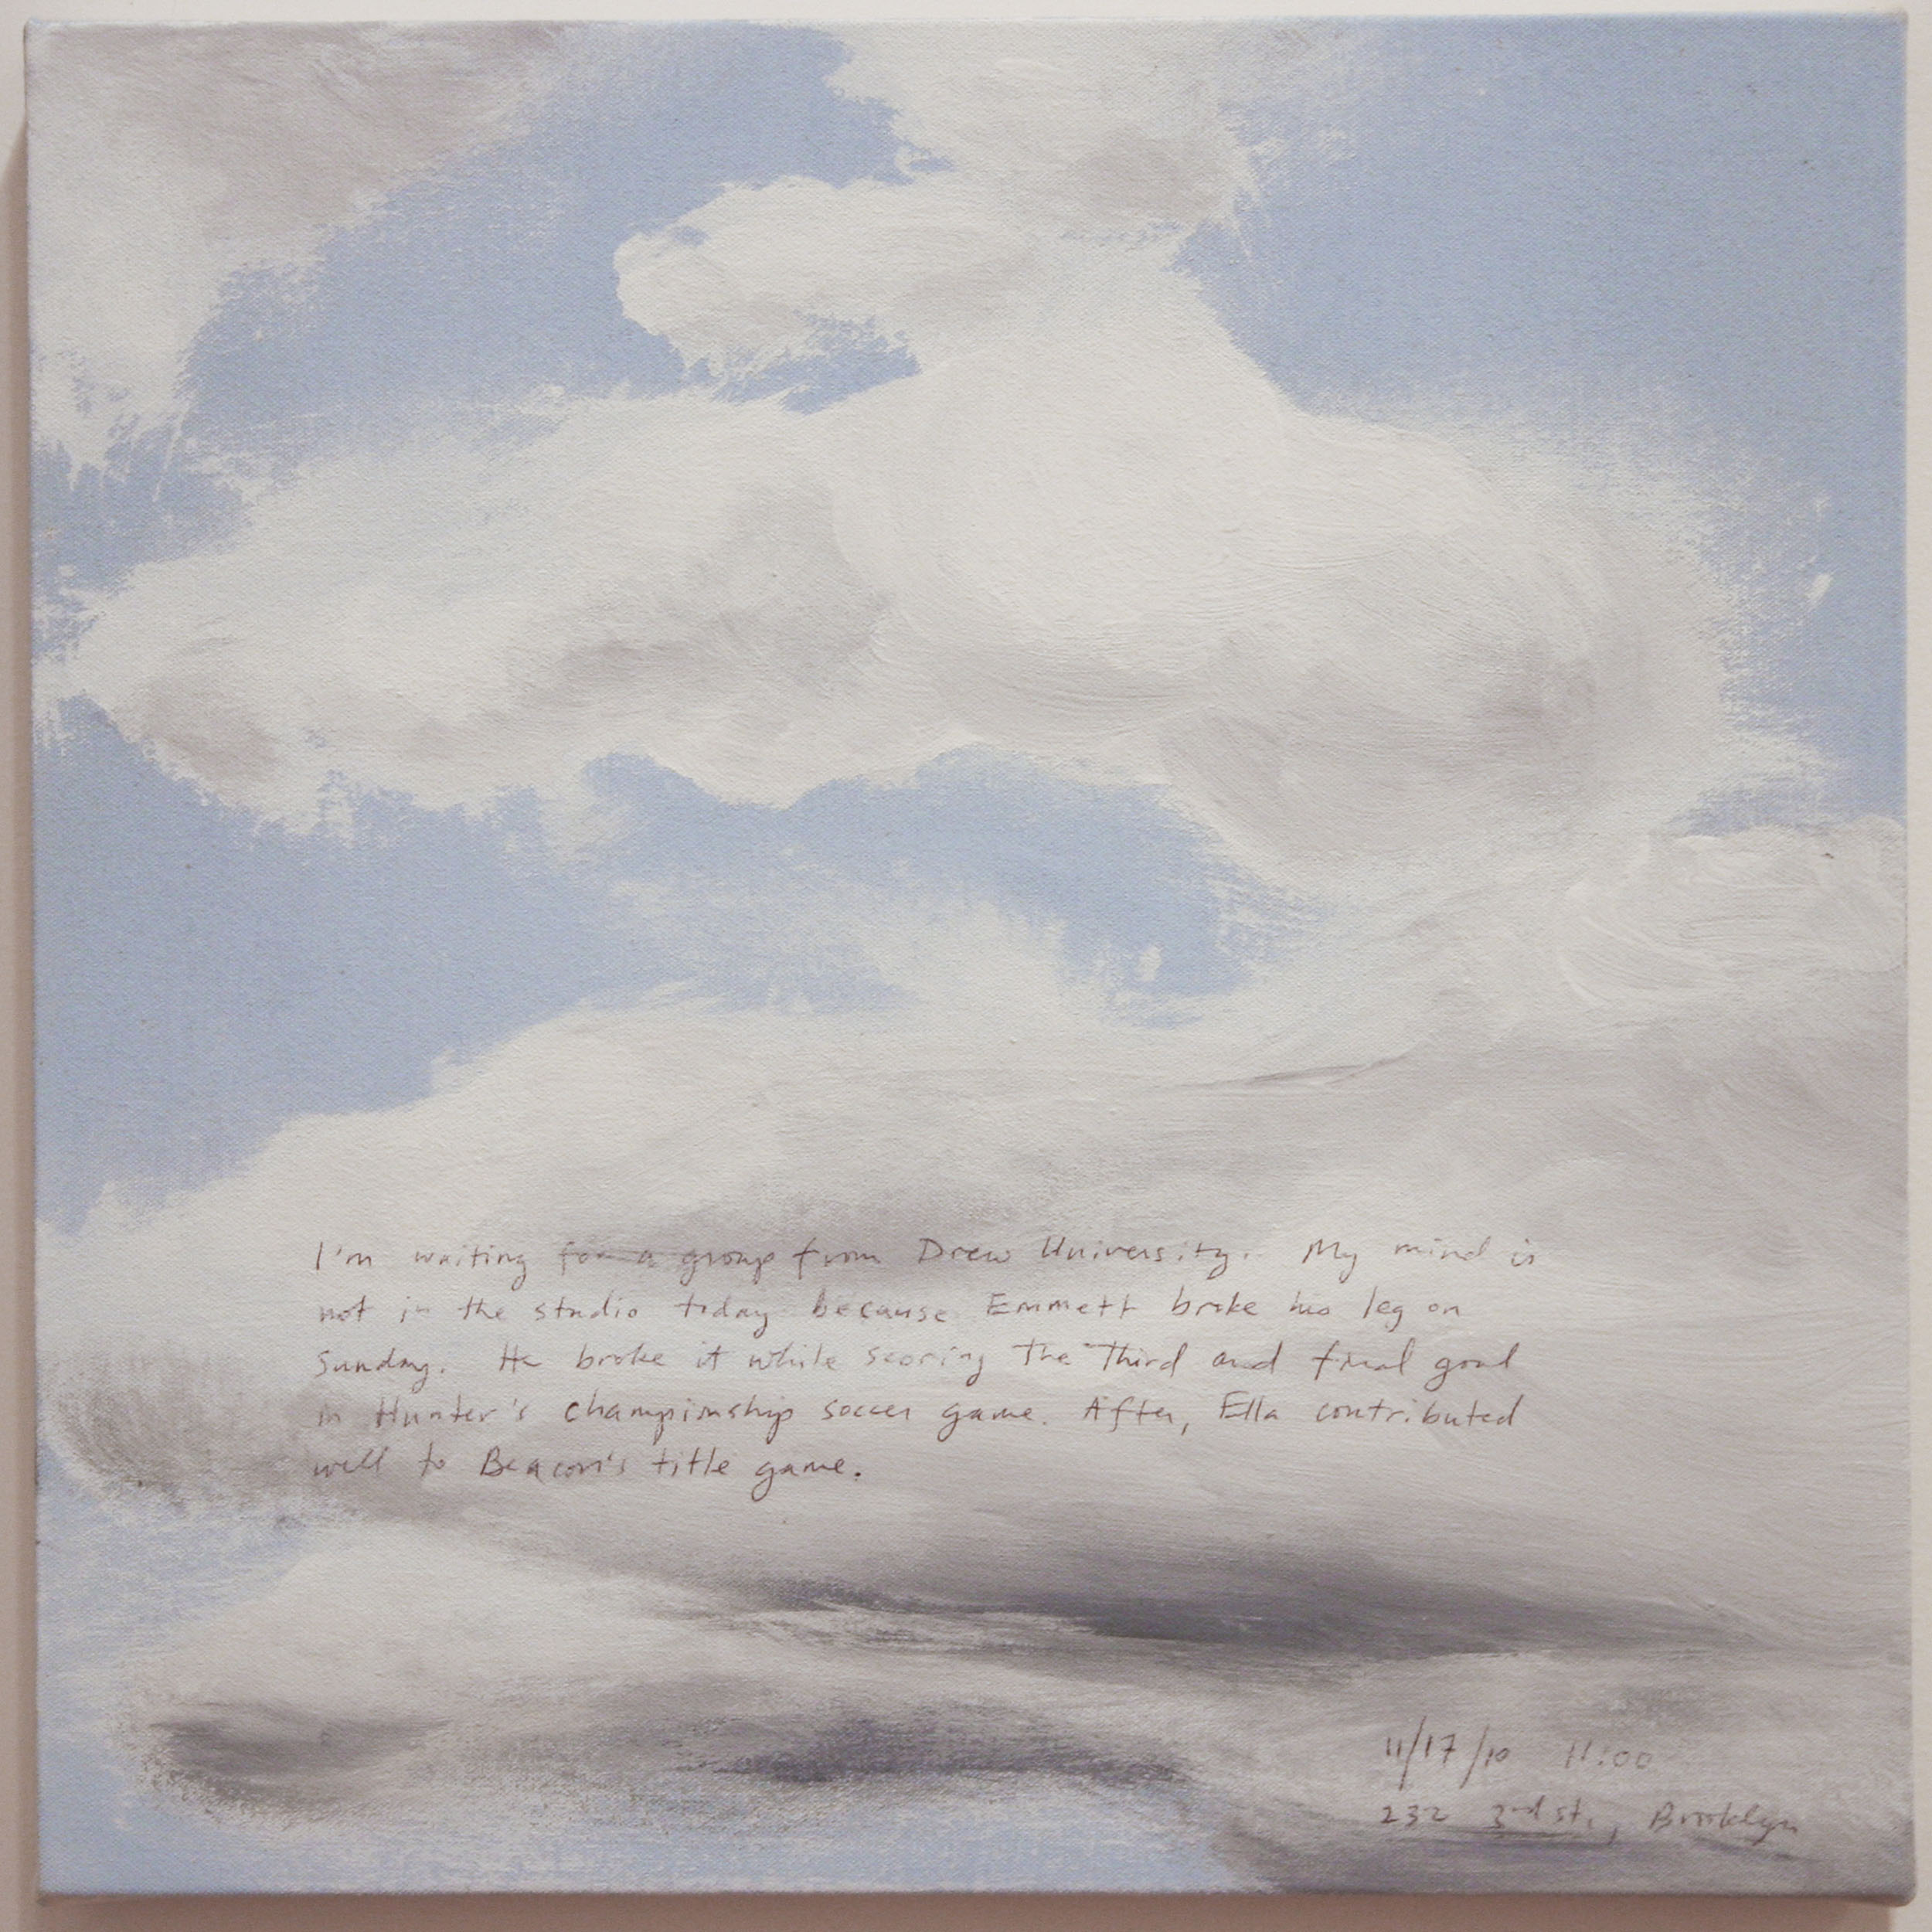 A 14 × 14 inch, acrylic painting of the sky. A journal entry is handwritten on the painting:

“I’m waiting for a group from Drew University. My mind is not in the studio today because Emmett broke his leg on Sunday. He broke it while scoring the third and final goal in Hunter’s championship soccer game. After, Ella contributed well to Beacon’s title game.

11/17/10, 11:00
232 3rd St., Brooklyn”